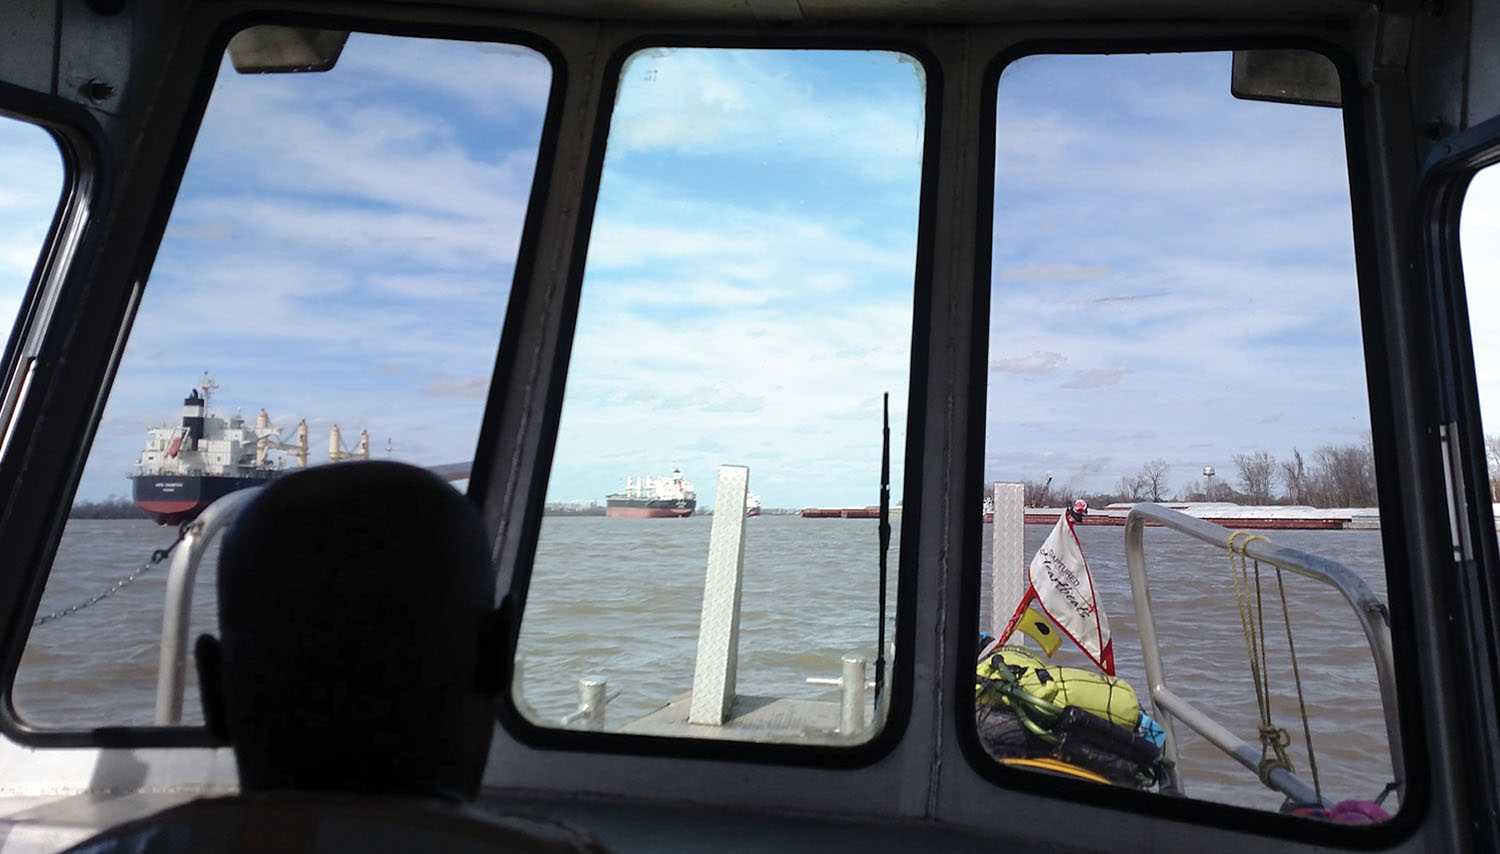 Rich Brand’s view from a Cooper Consolidated crew boat after Cooper fleet mates Brian Hoyal and Charles Abadie Jr. went to his aid February 14. Brand’s kayak can be seen on the bow of the crew boat. (Photo by Rich Brand, Captured Heartbeats)